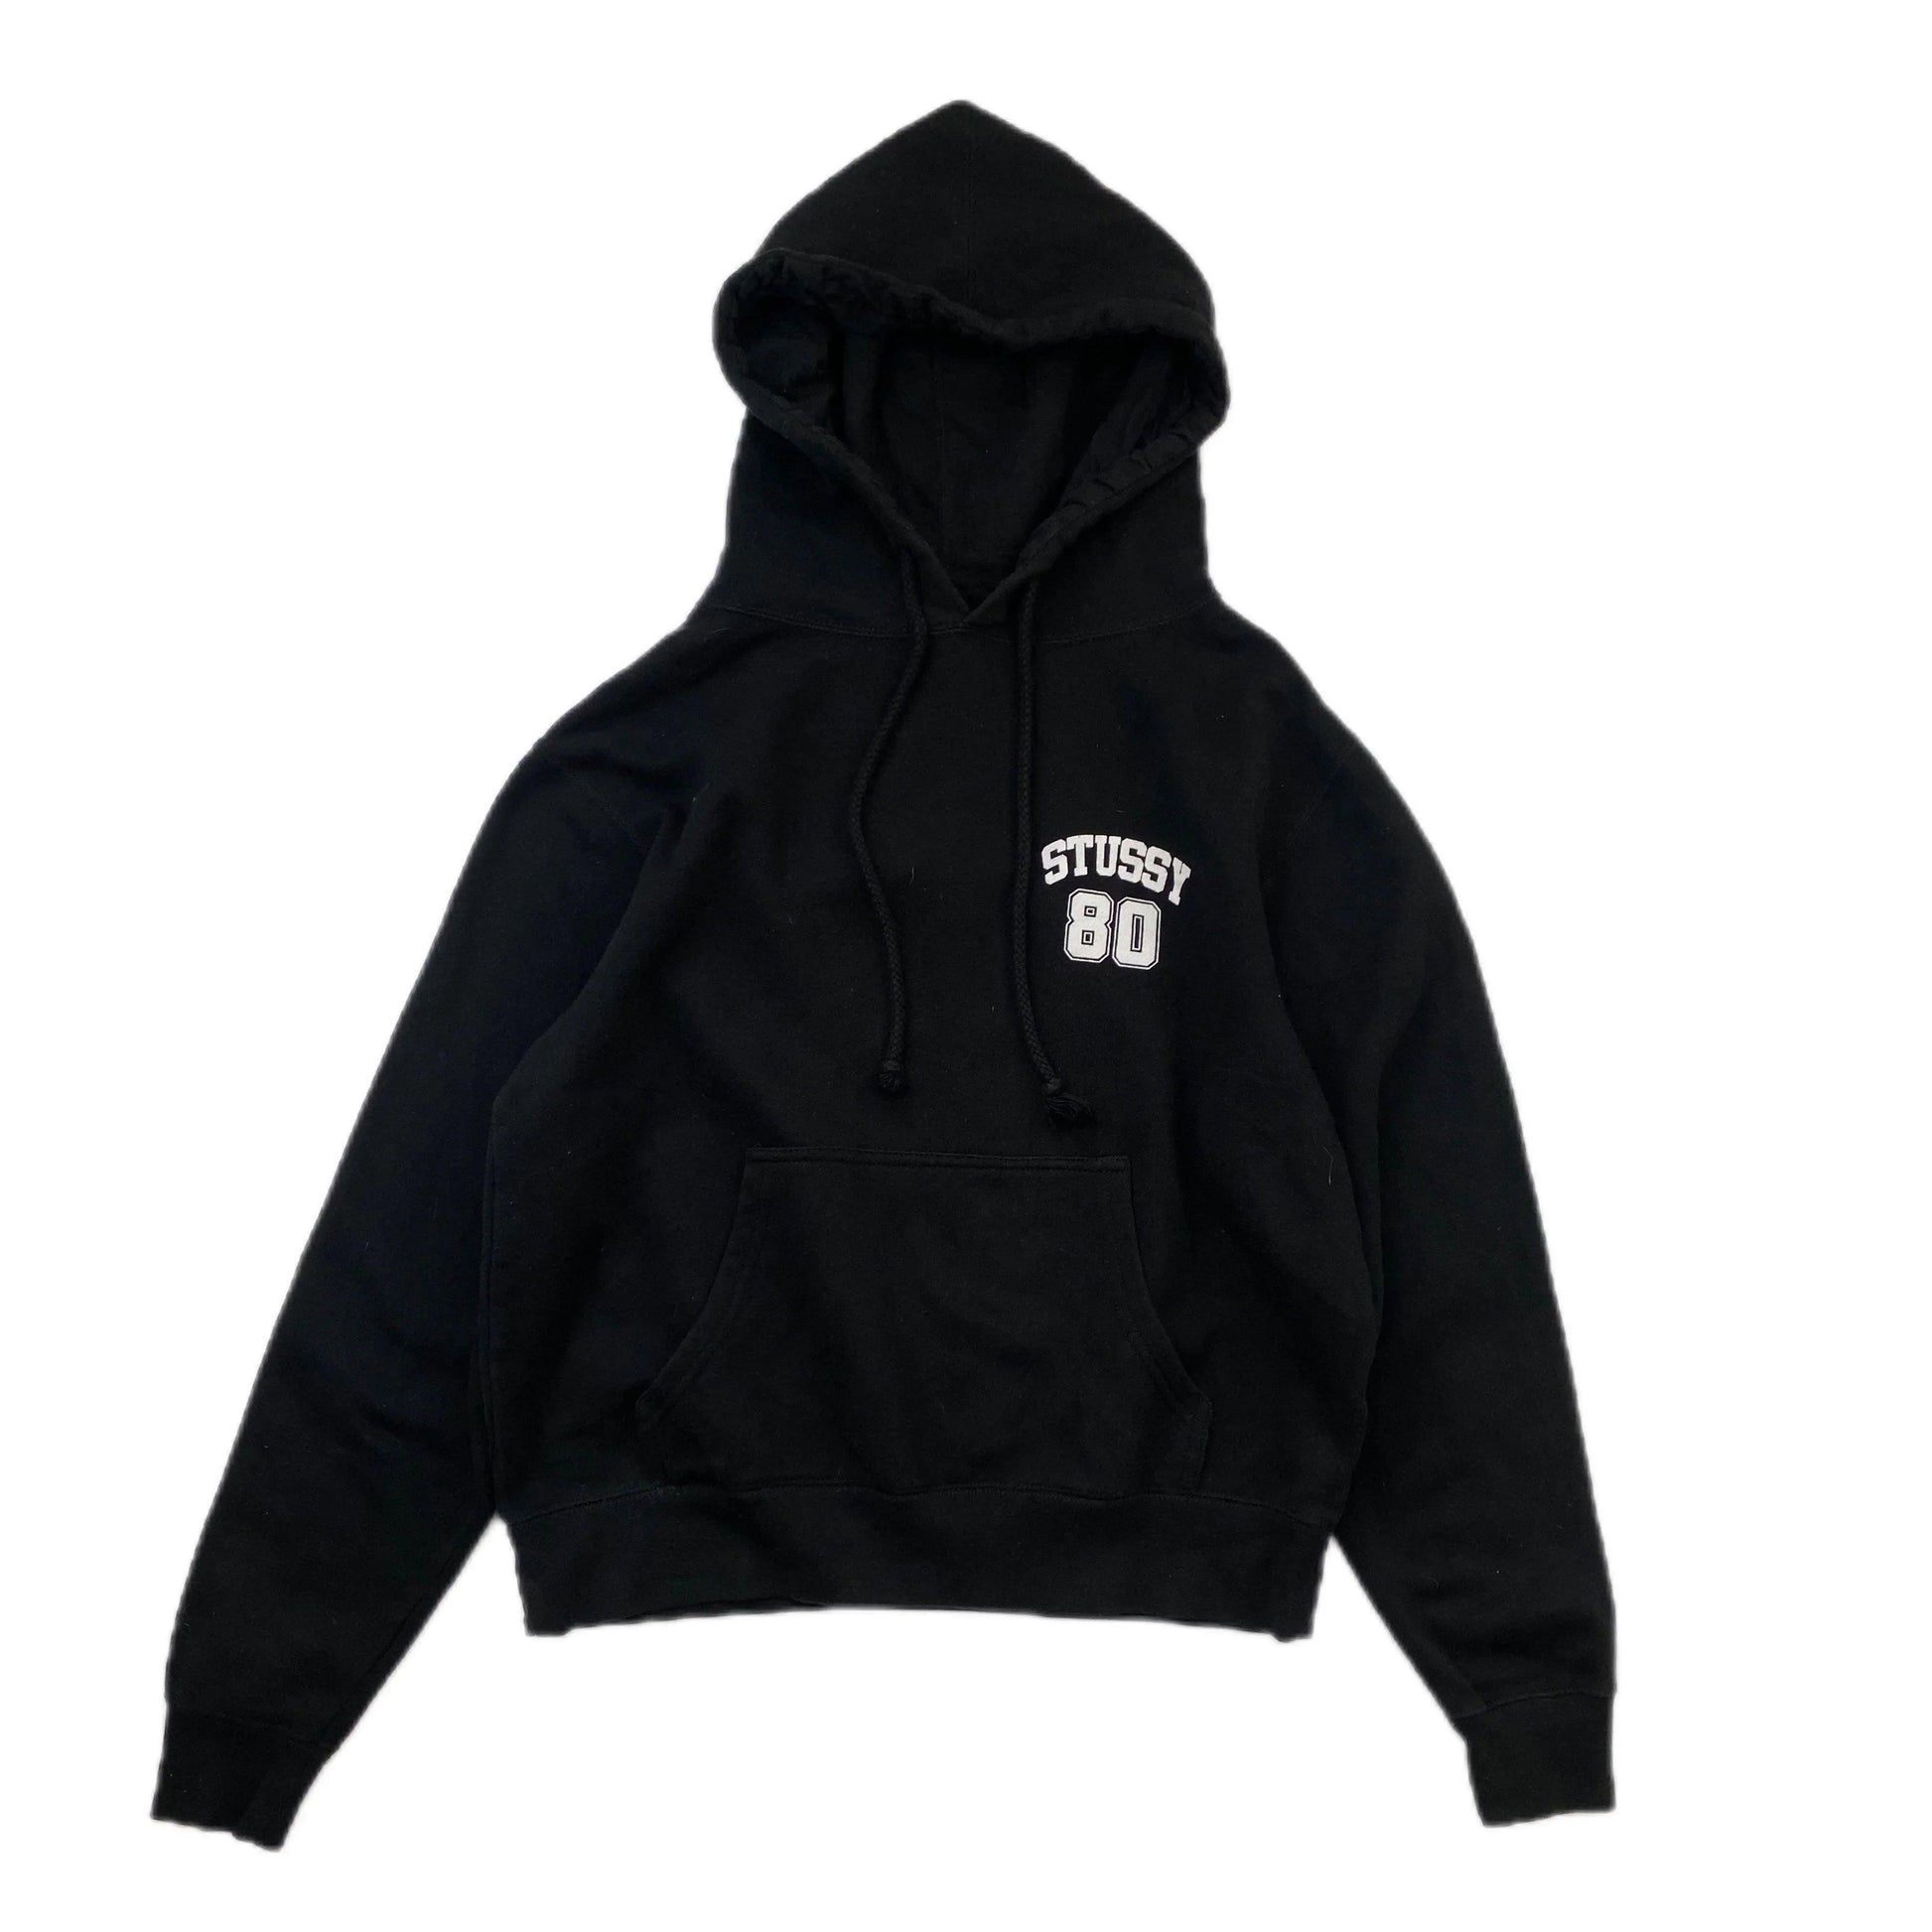 STUSSY TRIBE HOODY - Known Source